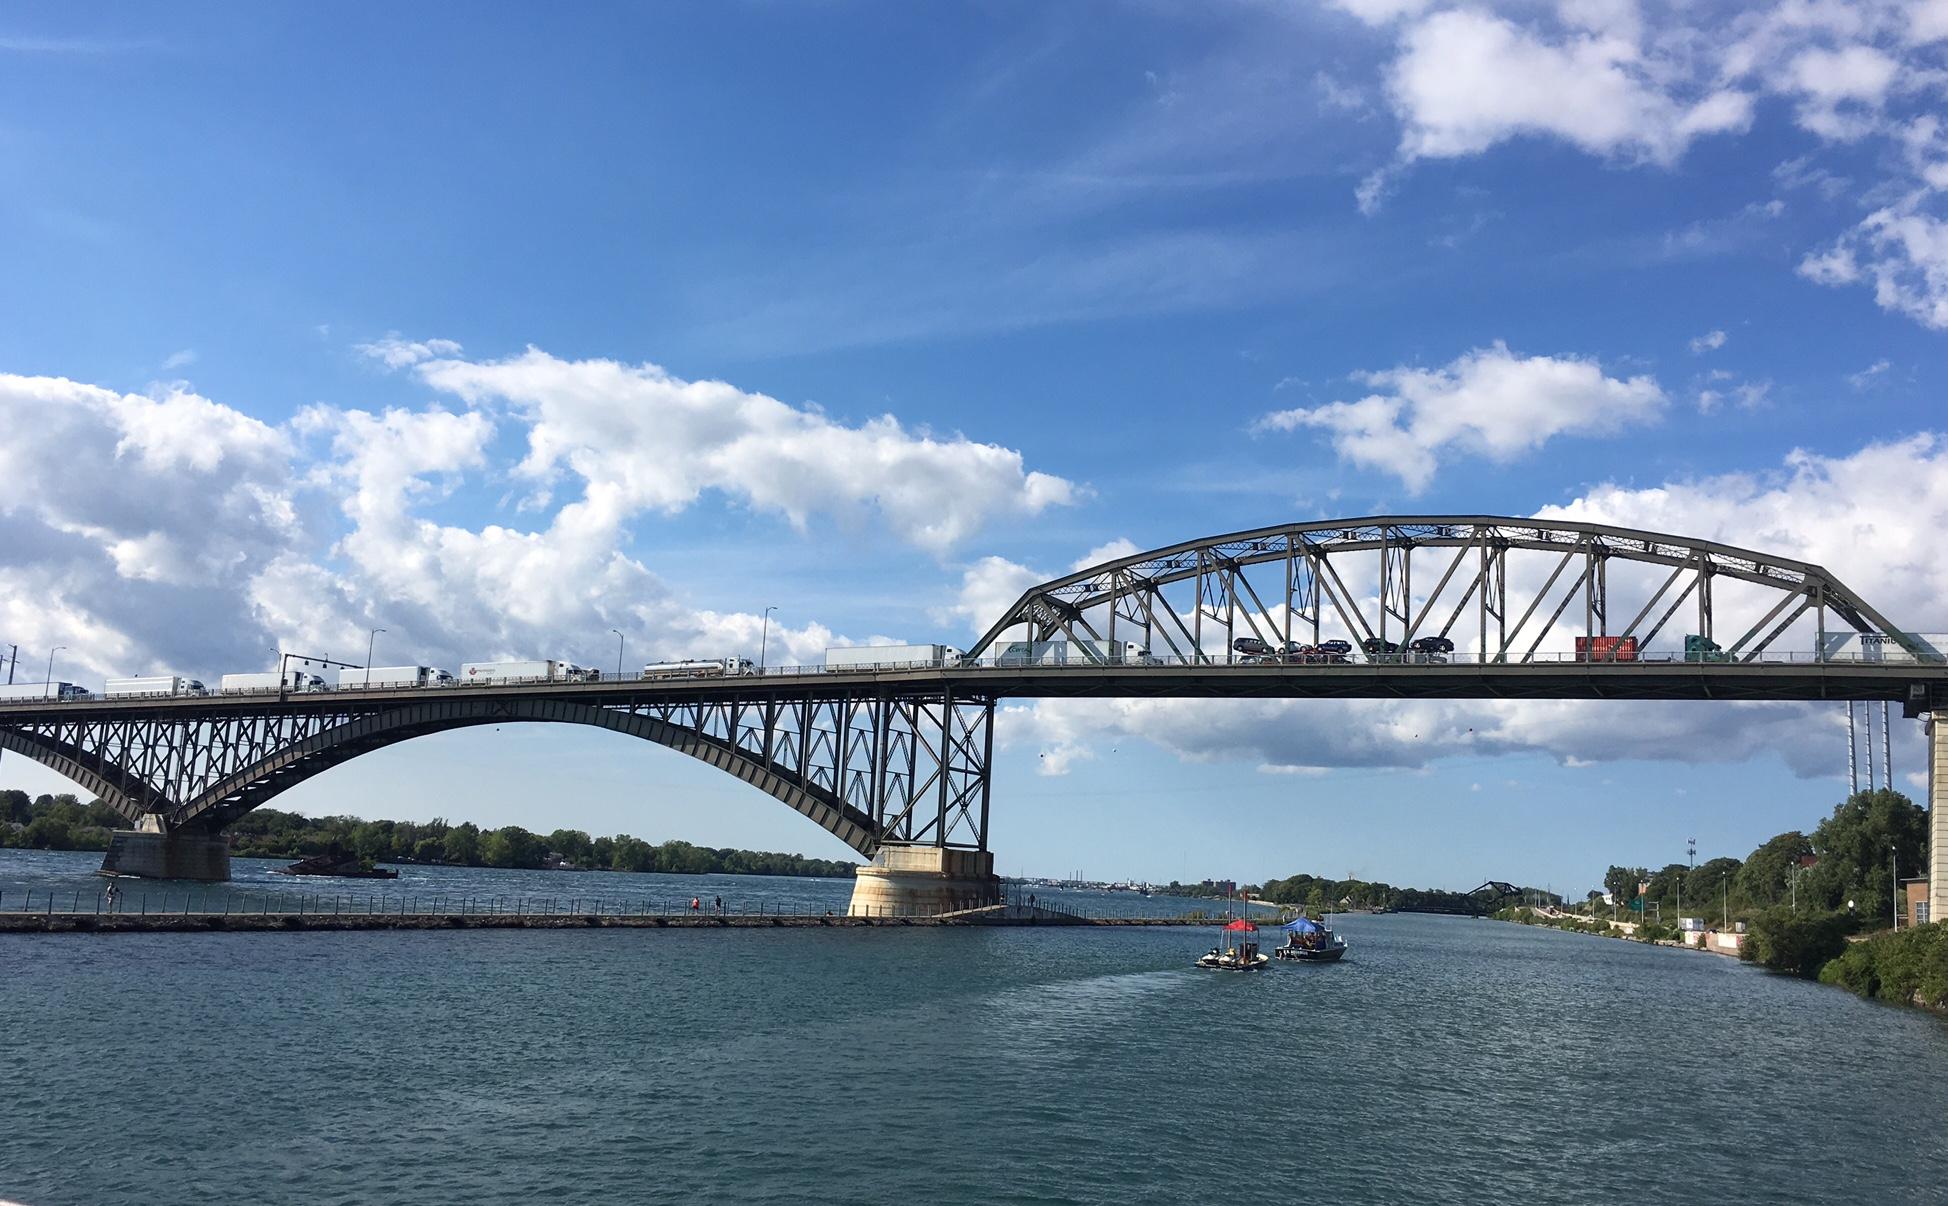 Peace Bridge traffic flow is being aided by technology | WBFO